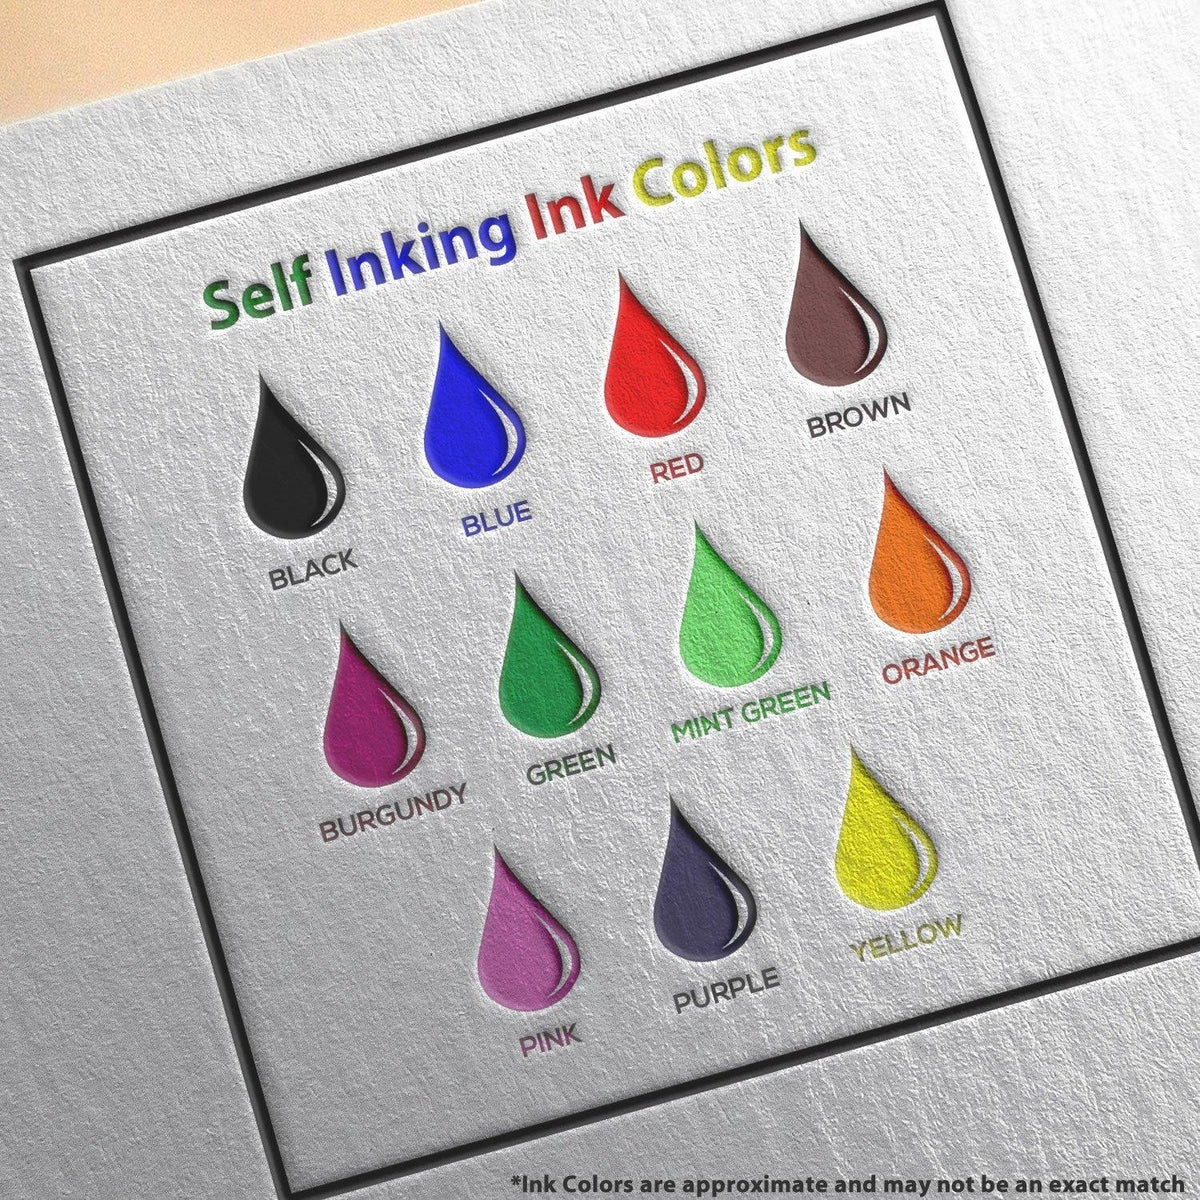 Large Self Inking Chart Thinned On Stamp Ink Color Options